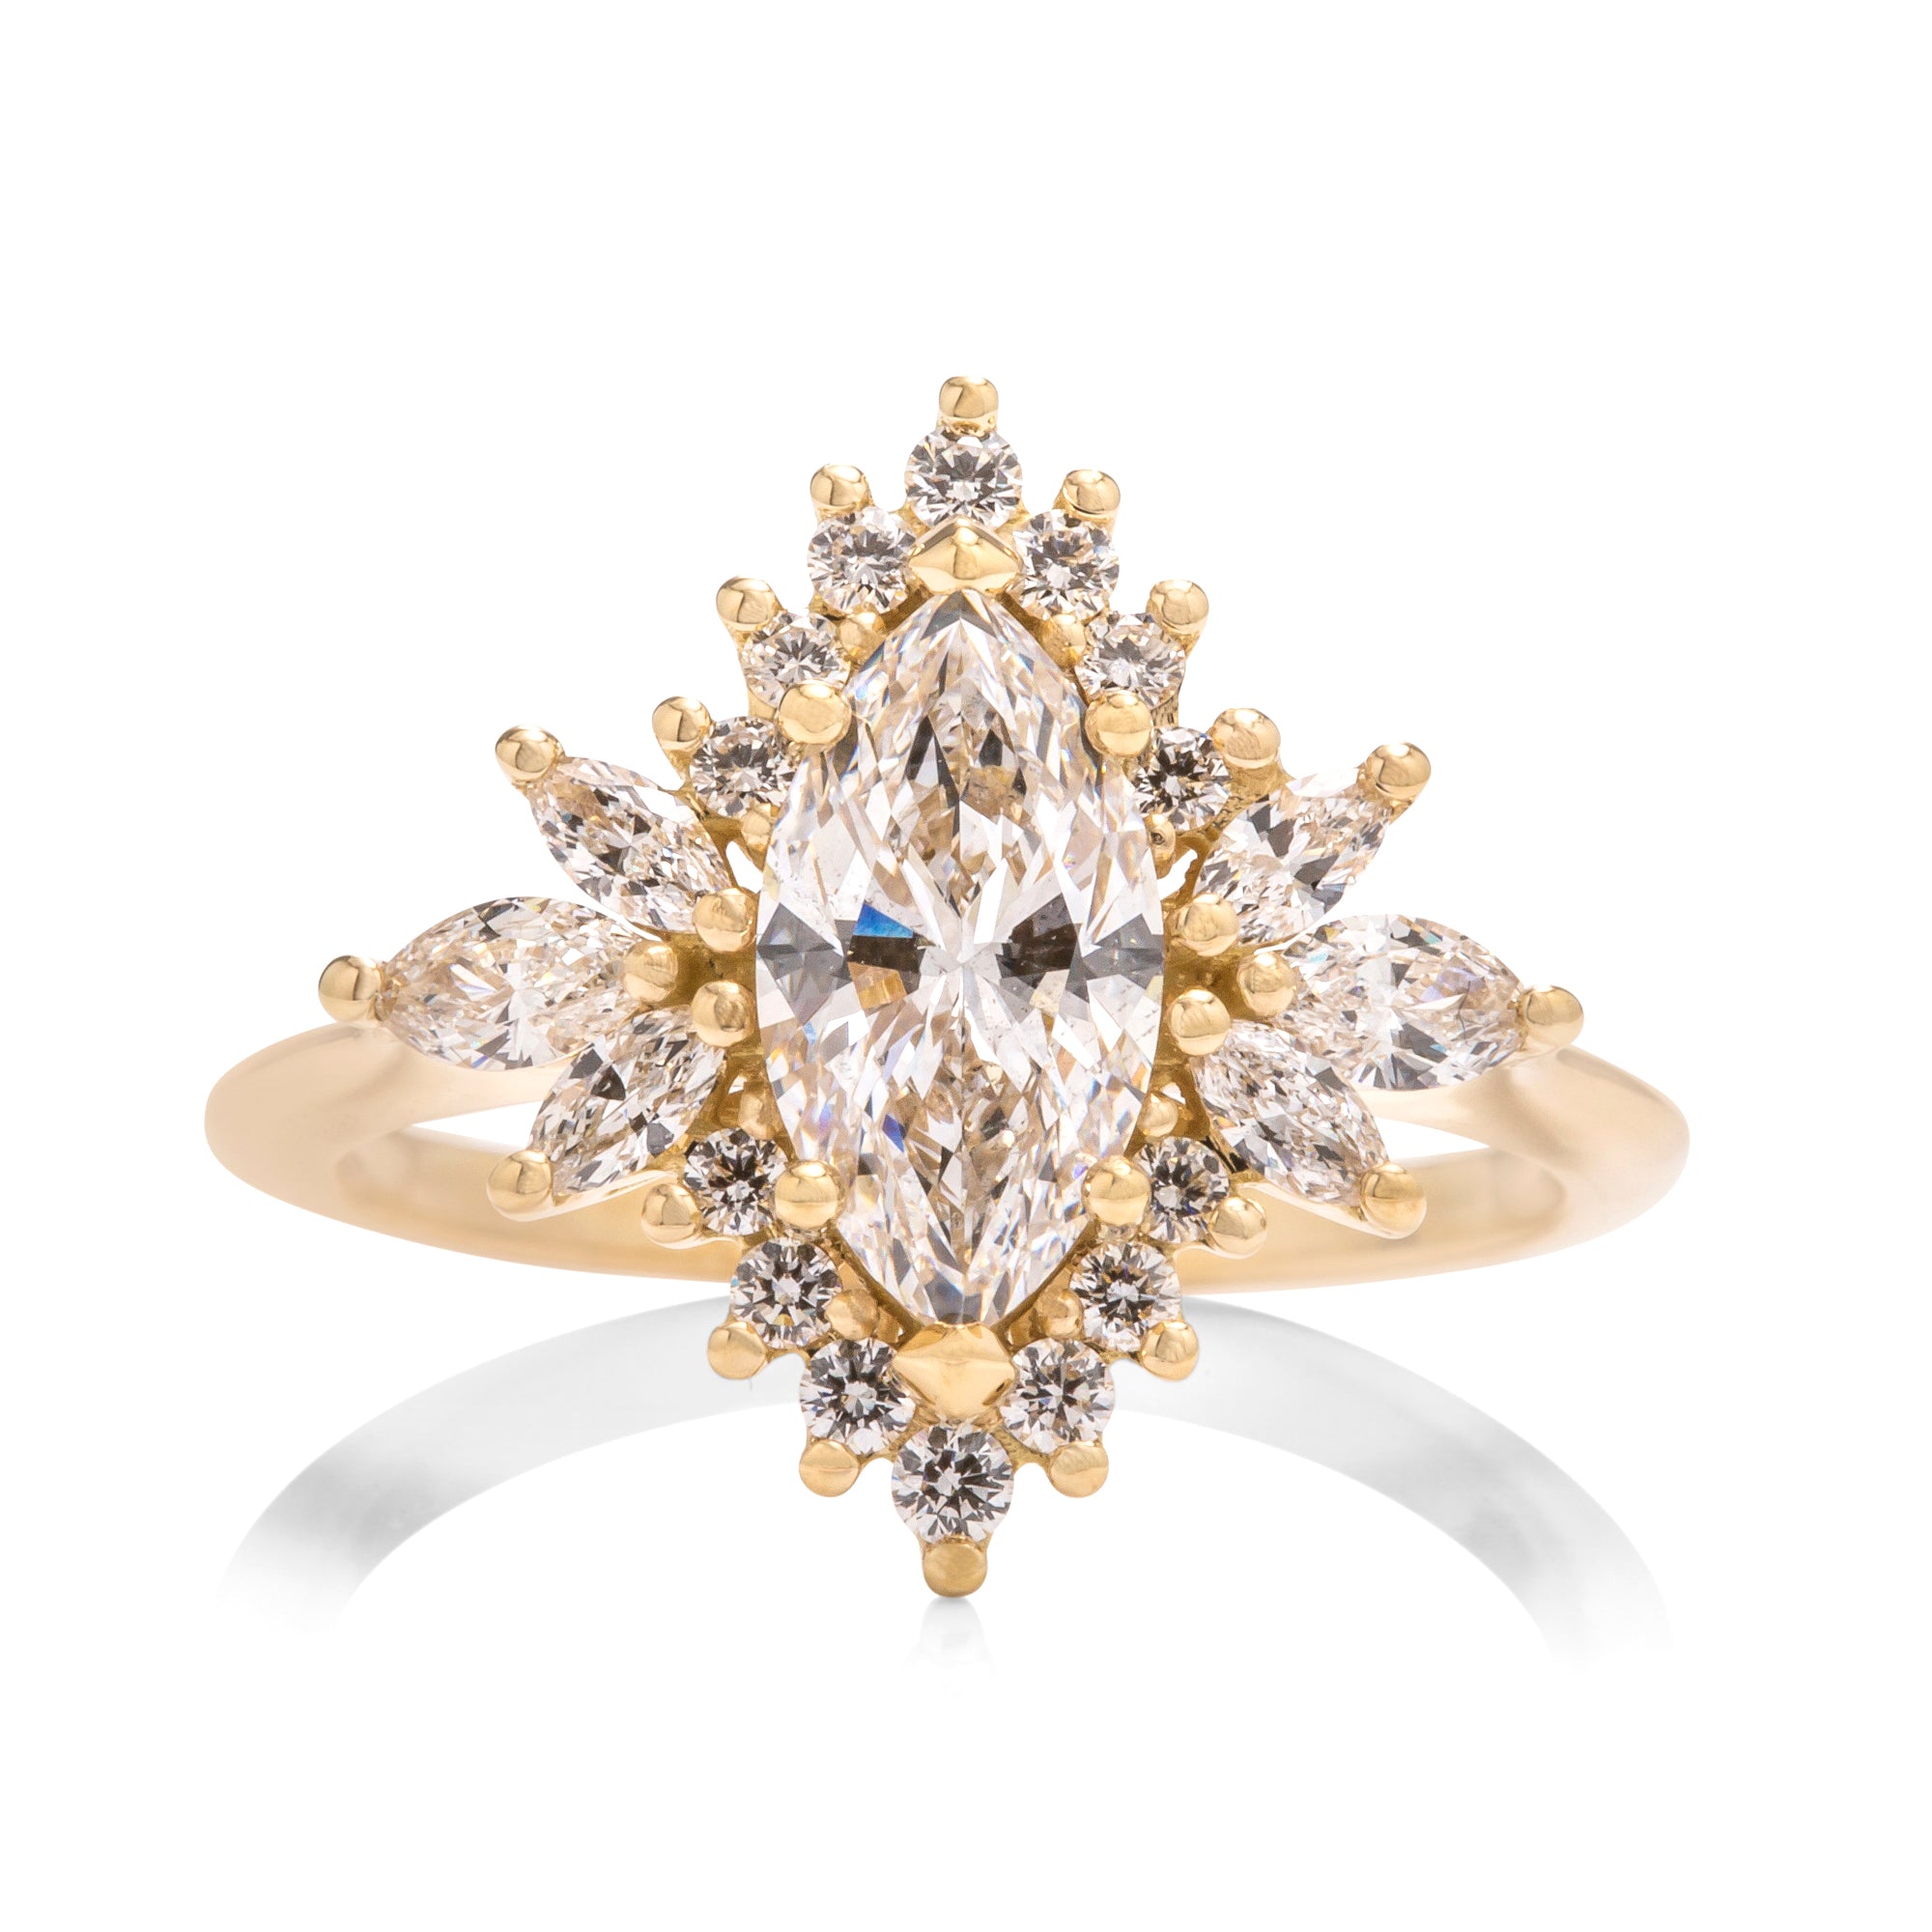 Fancy Halo Marquise Engagement Ring - Charles Koll Jewellers